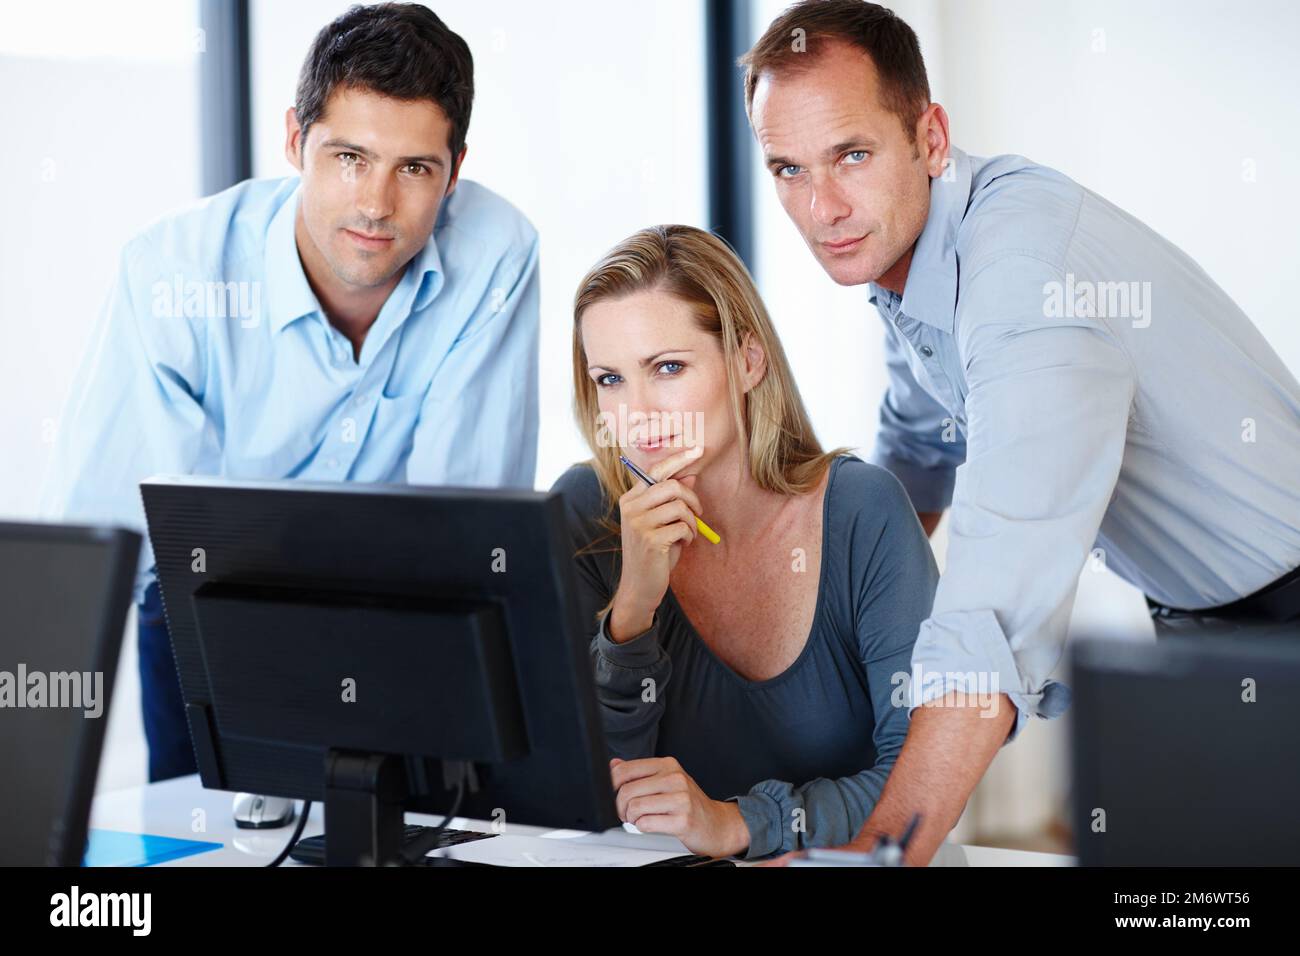 Showing them whos boss. a group of workers looking serious in their office. Stock Photo